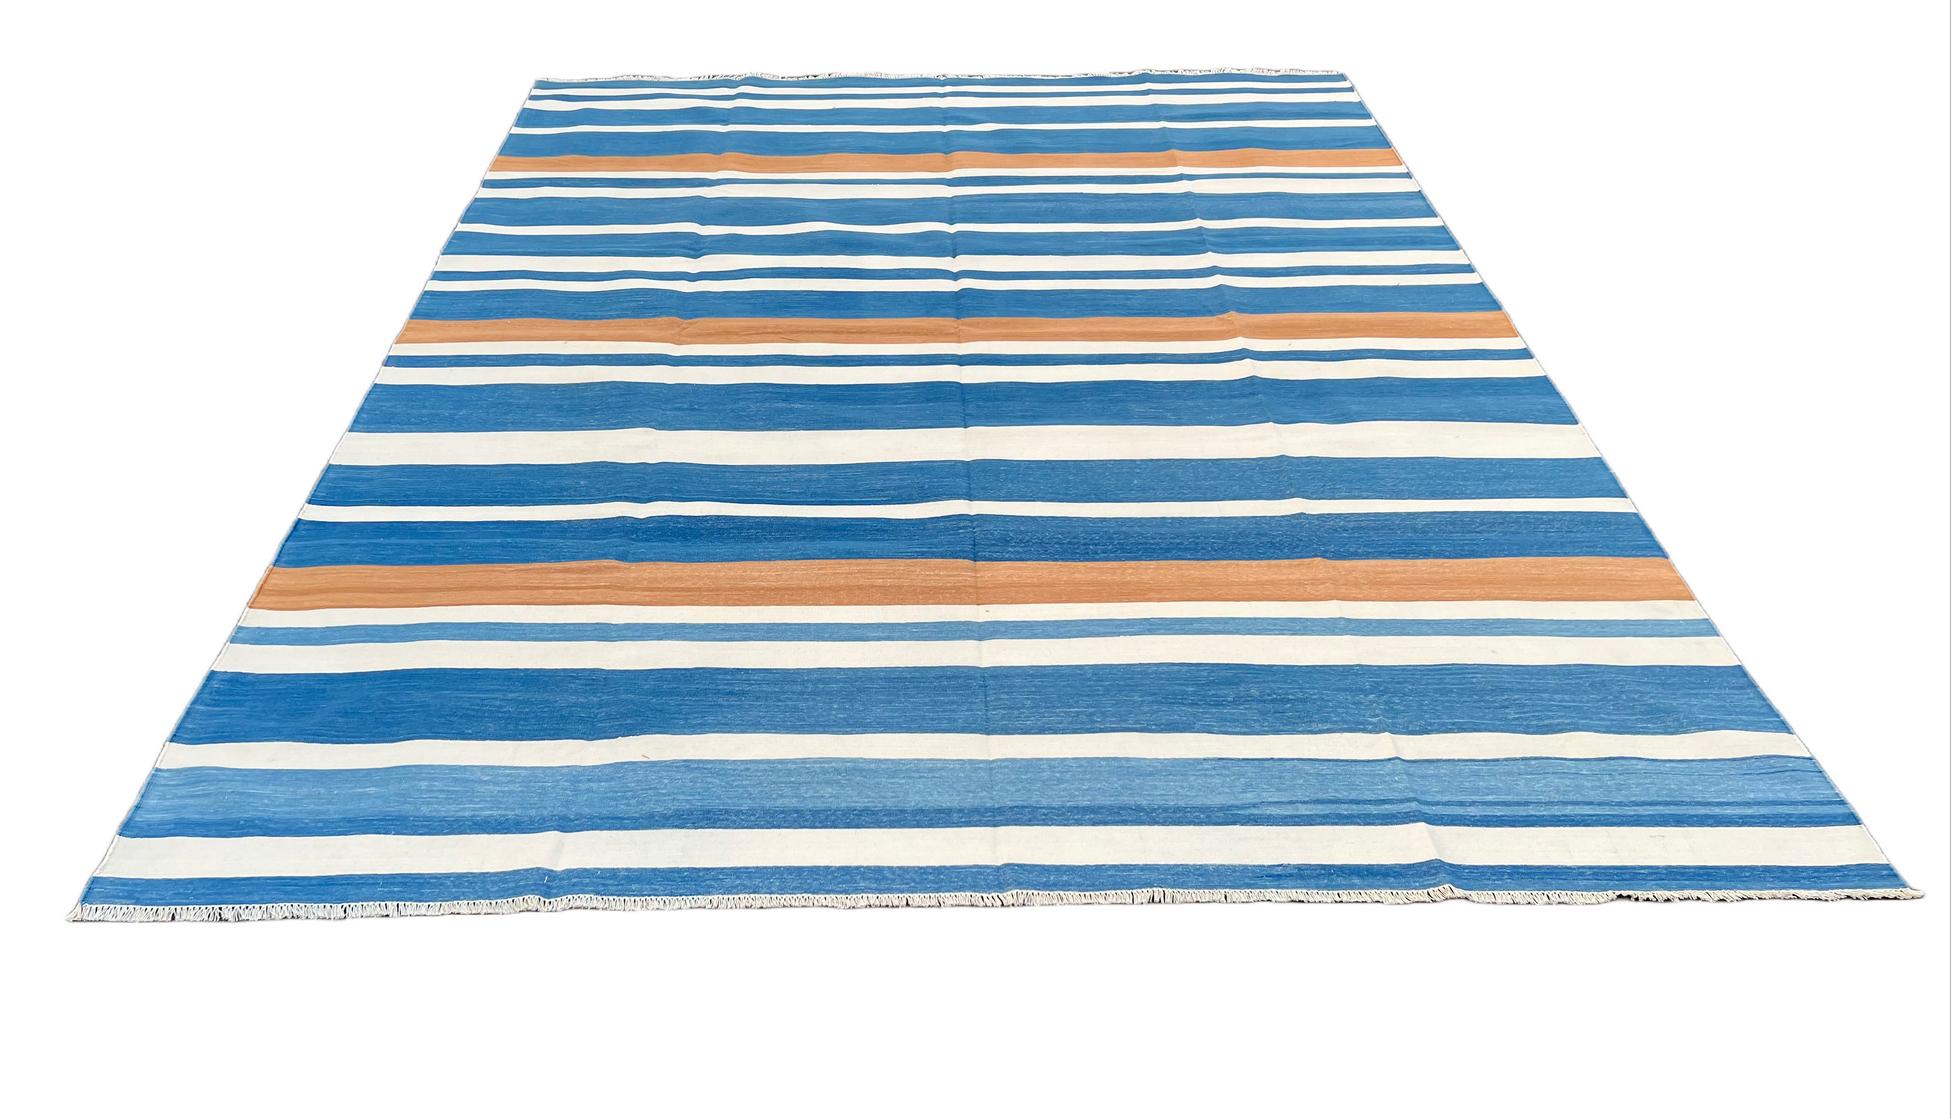 Contemporary Handmade Cotton Area Flat Weave Rug, 8x10 Blue And White Striped Indian Dhurrie For Sale